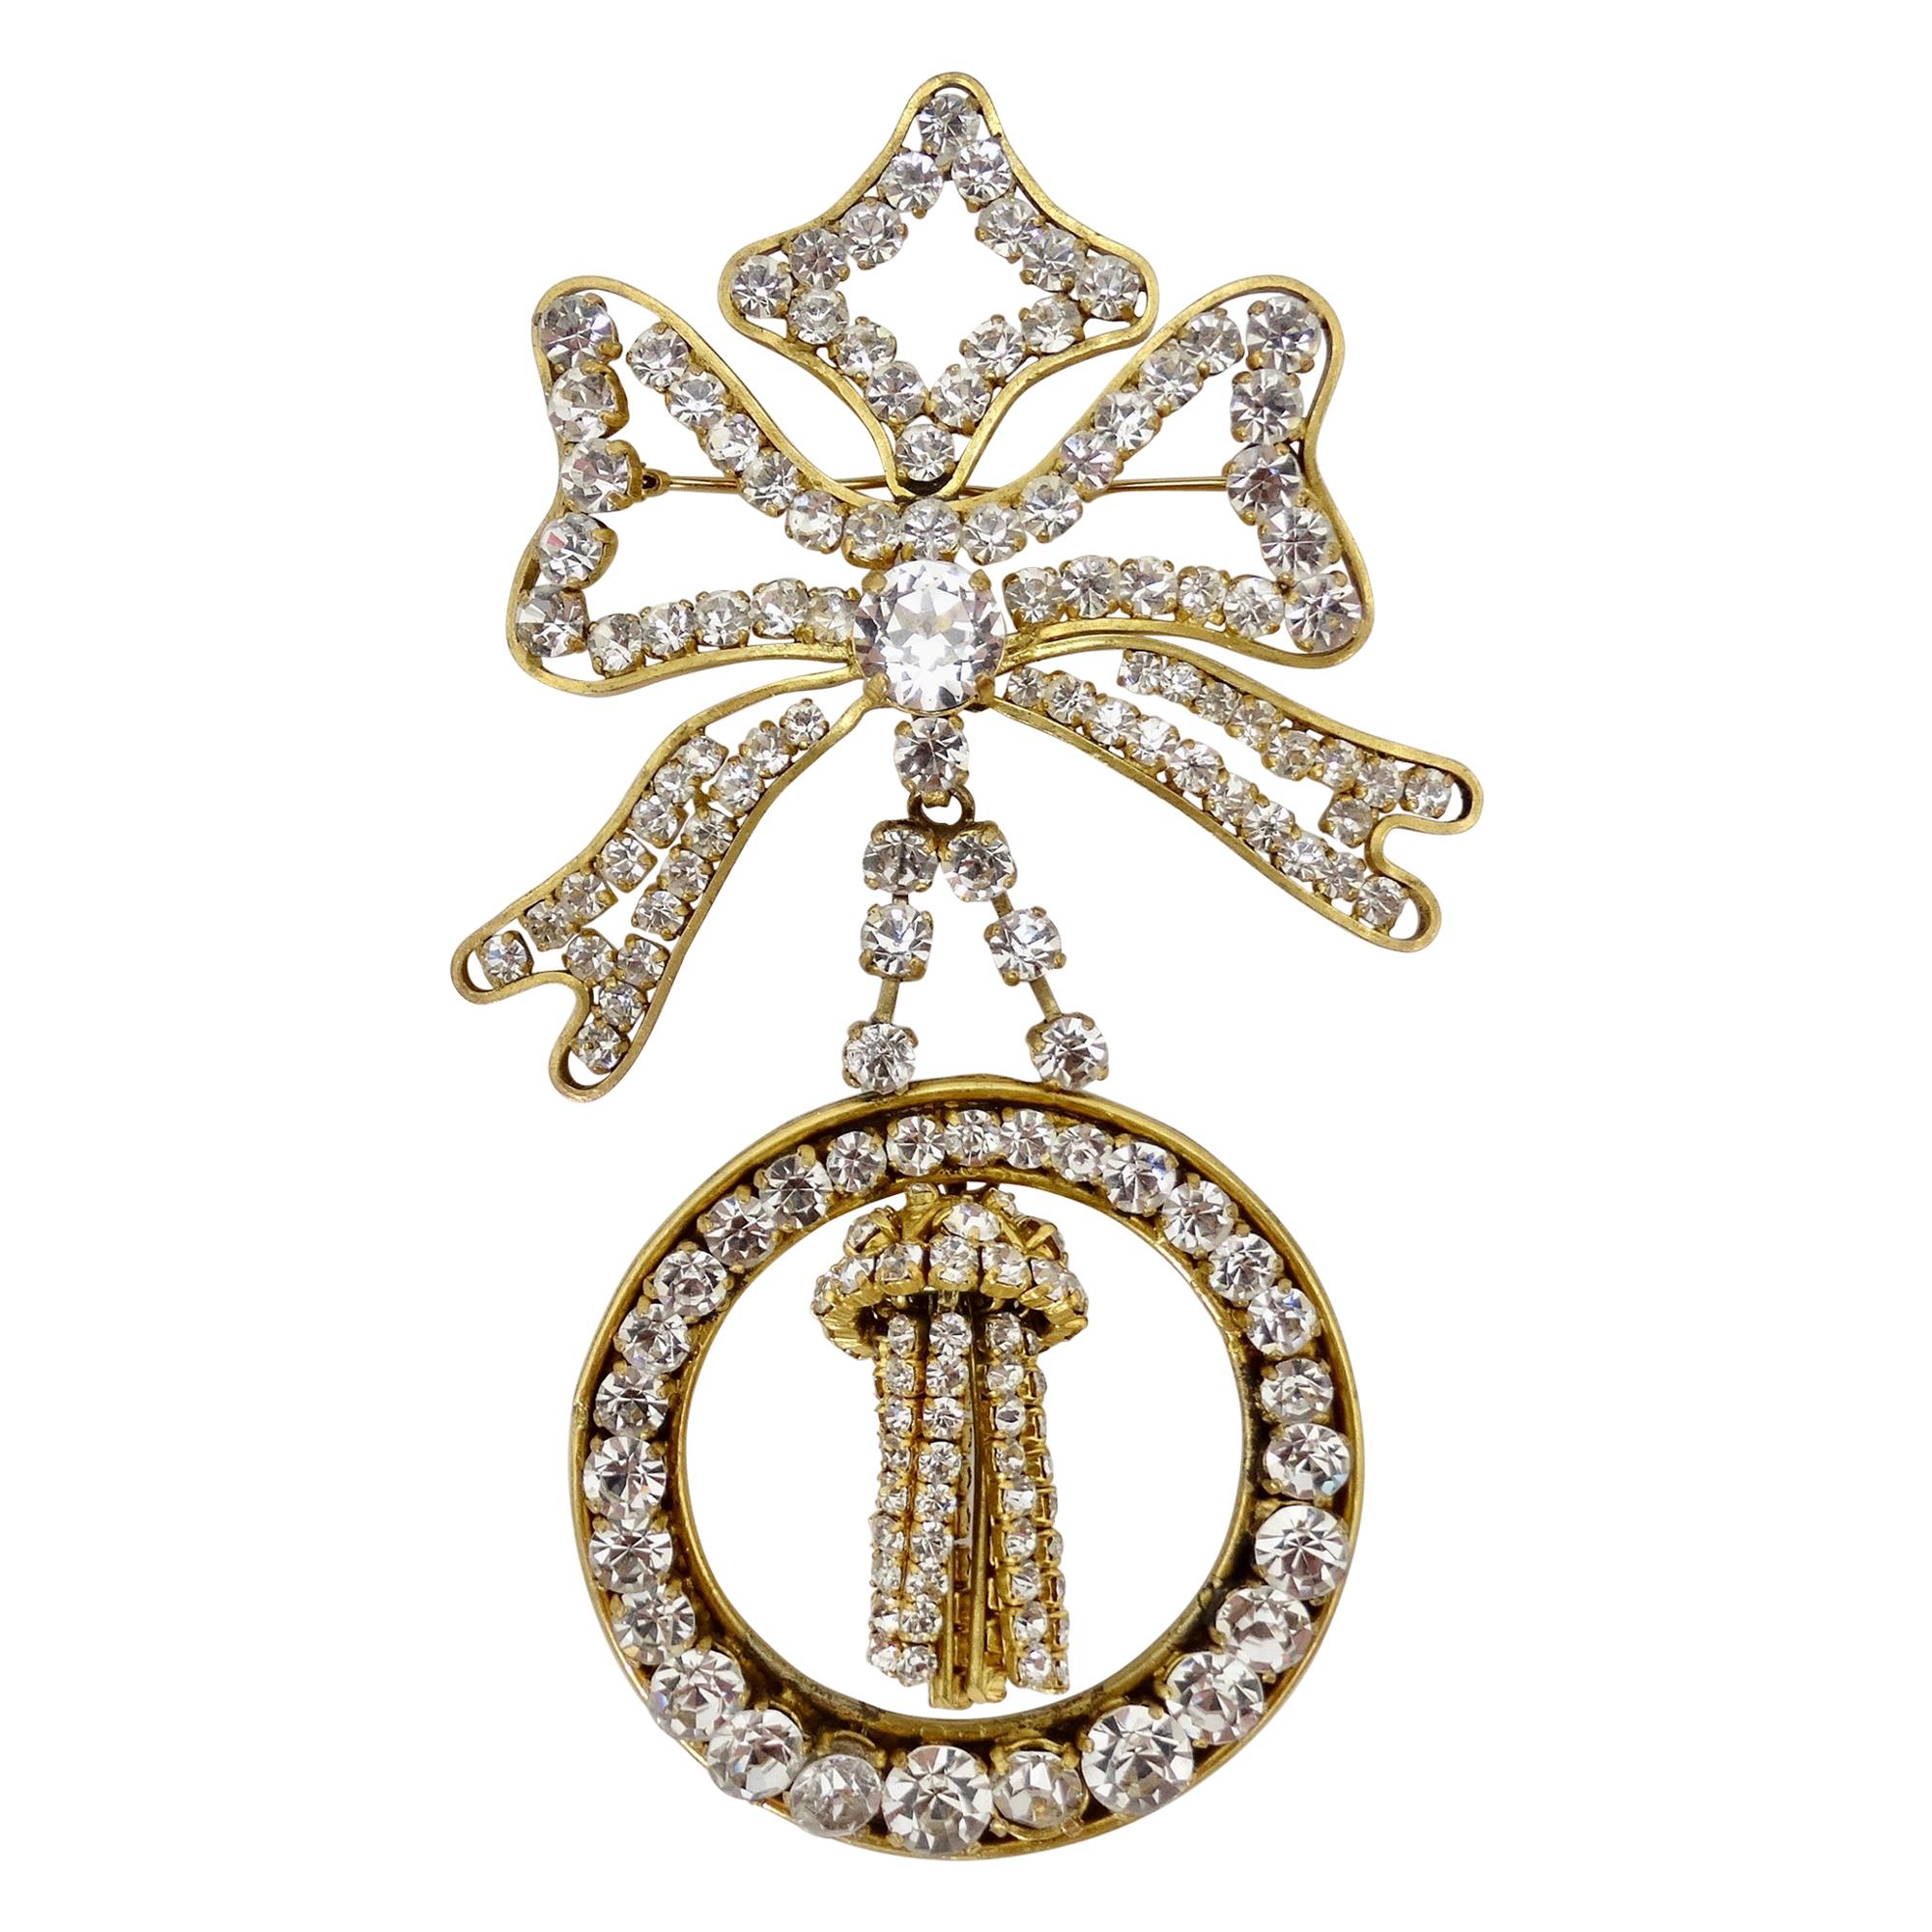 Chanel 1980s Haute Couture Statement Brooch 